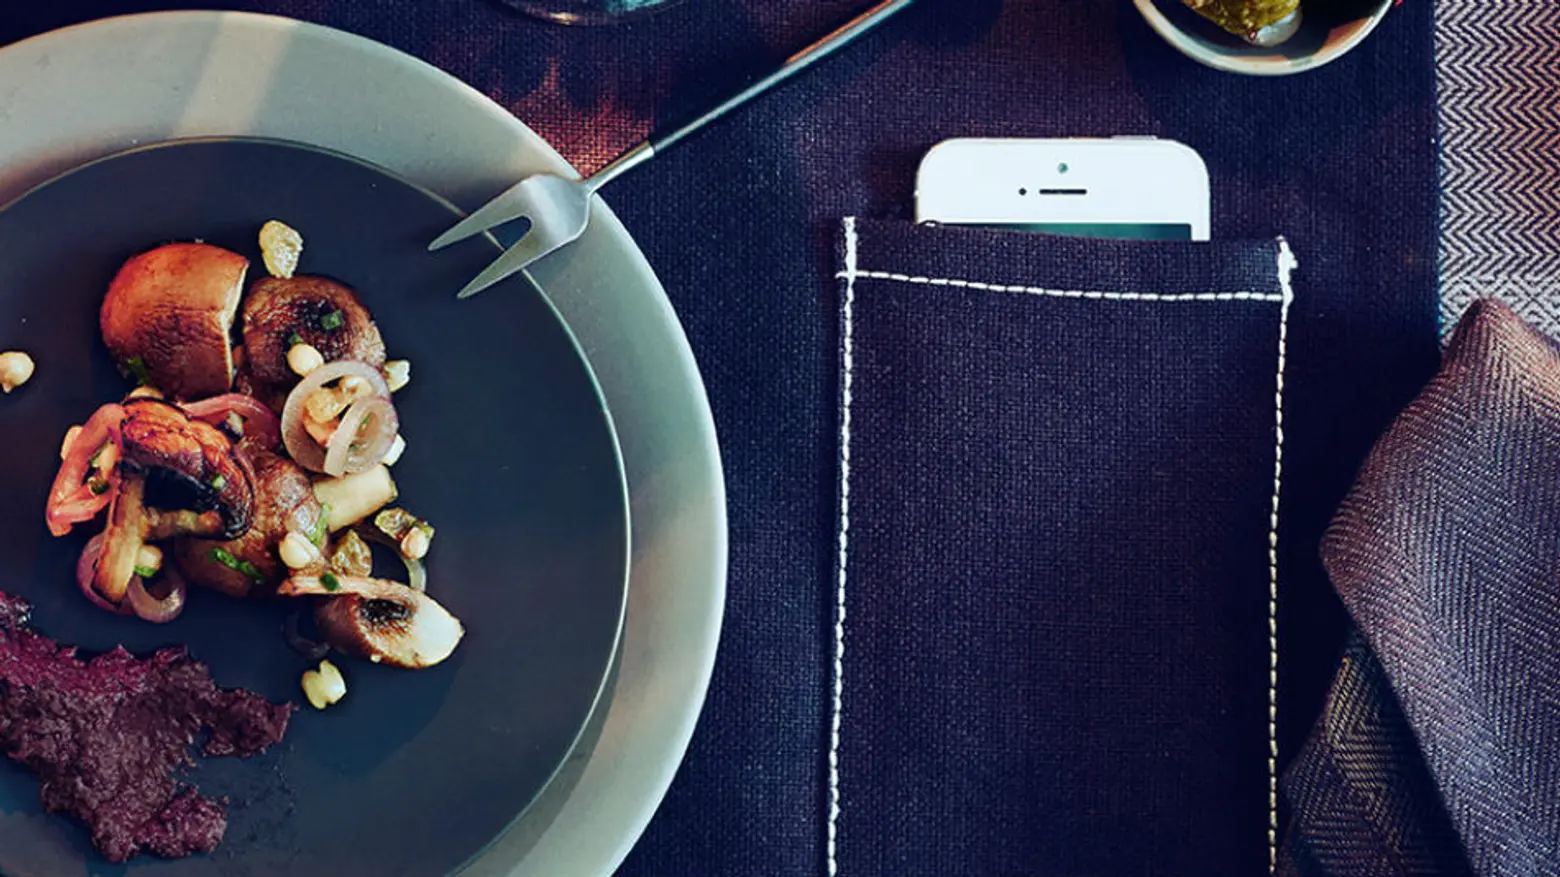 IKEA Is Selling a Placemat with a Pocket for Your Phone